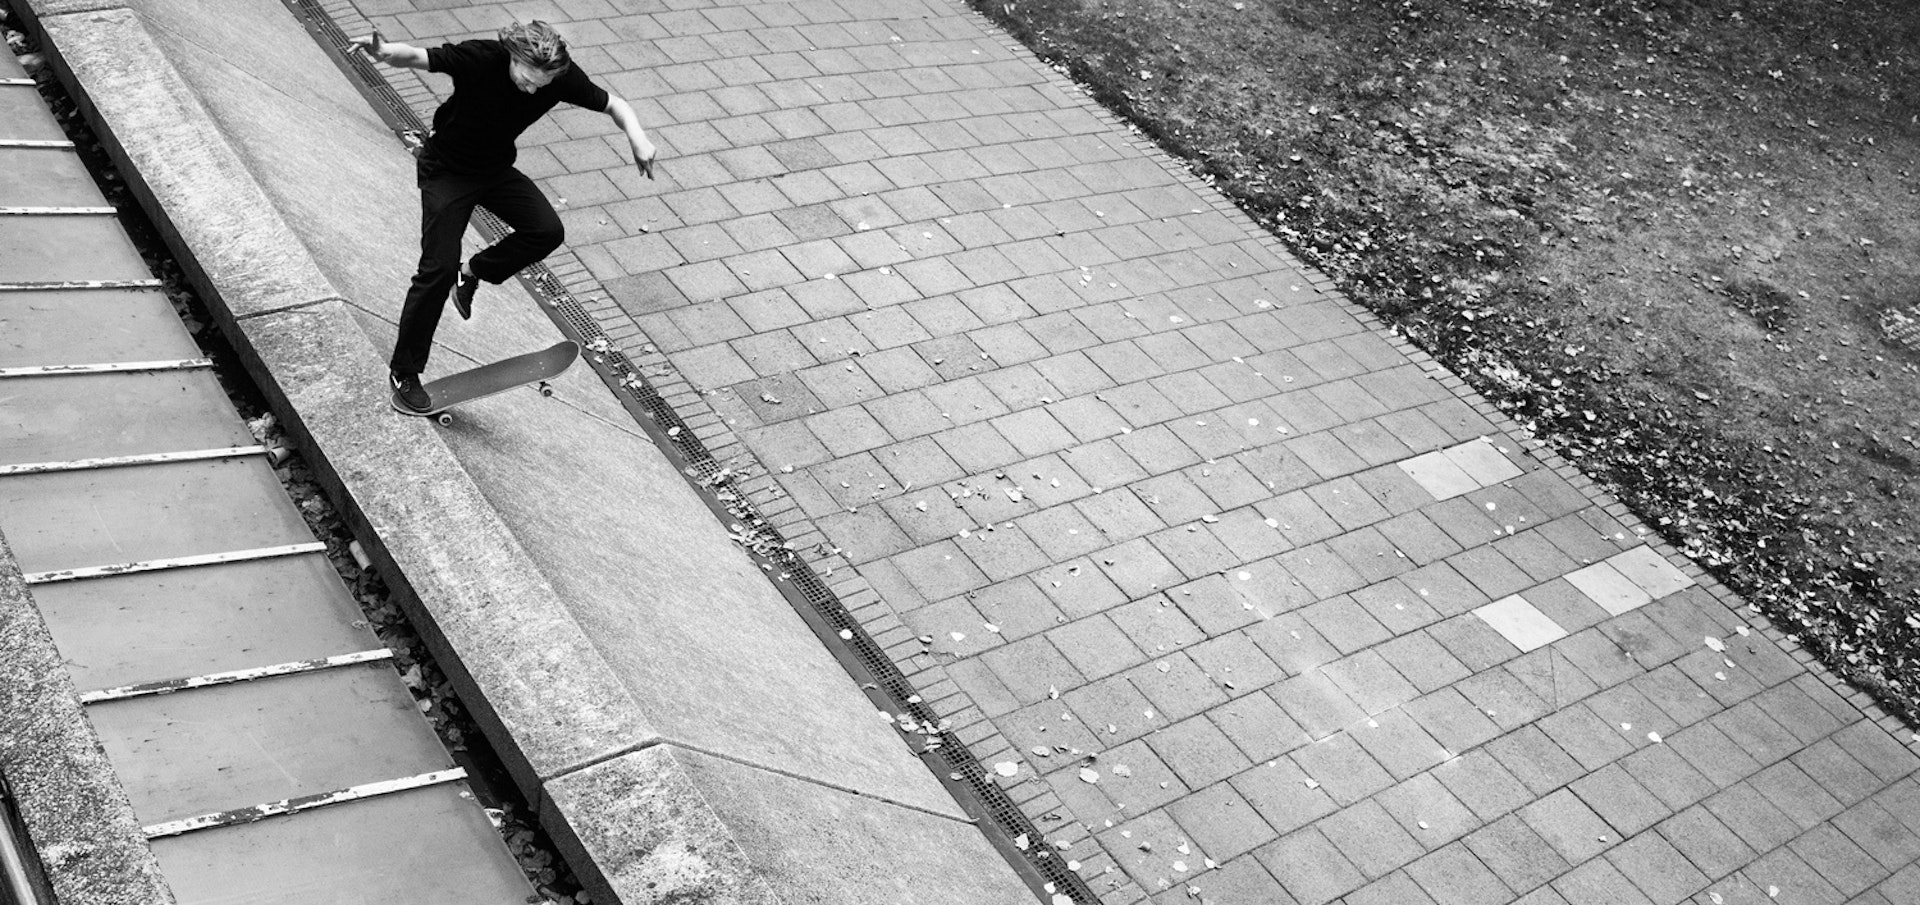 Rough spots, Cold in the D and saving South Bank: Casper Brooker's London skate life